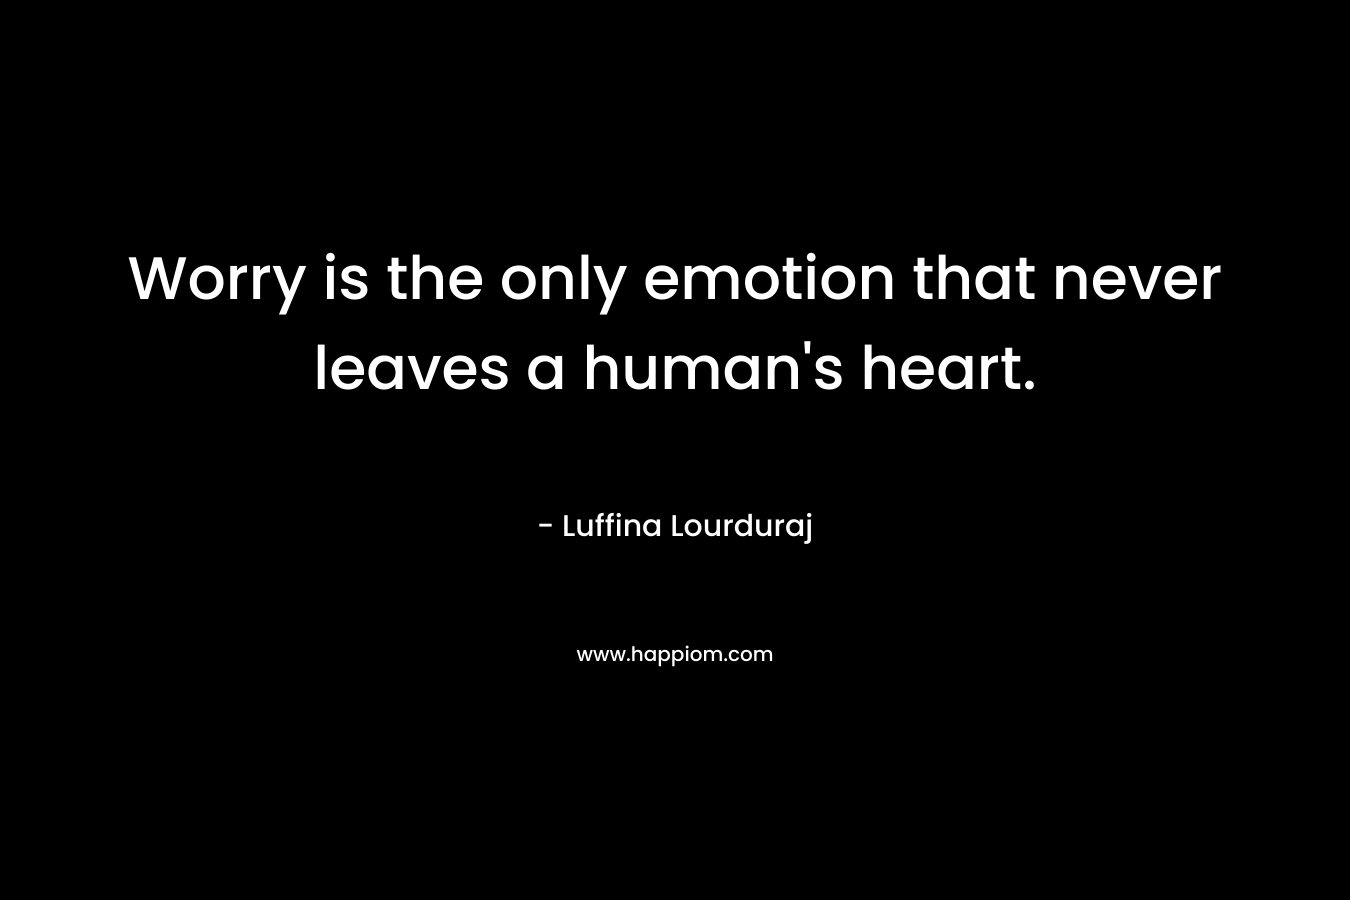 Worry is the only emotion that never leaves a human's heart.